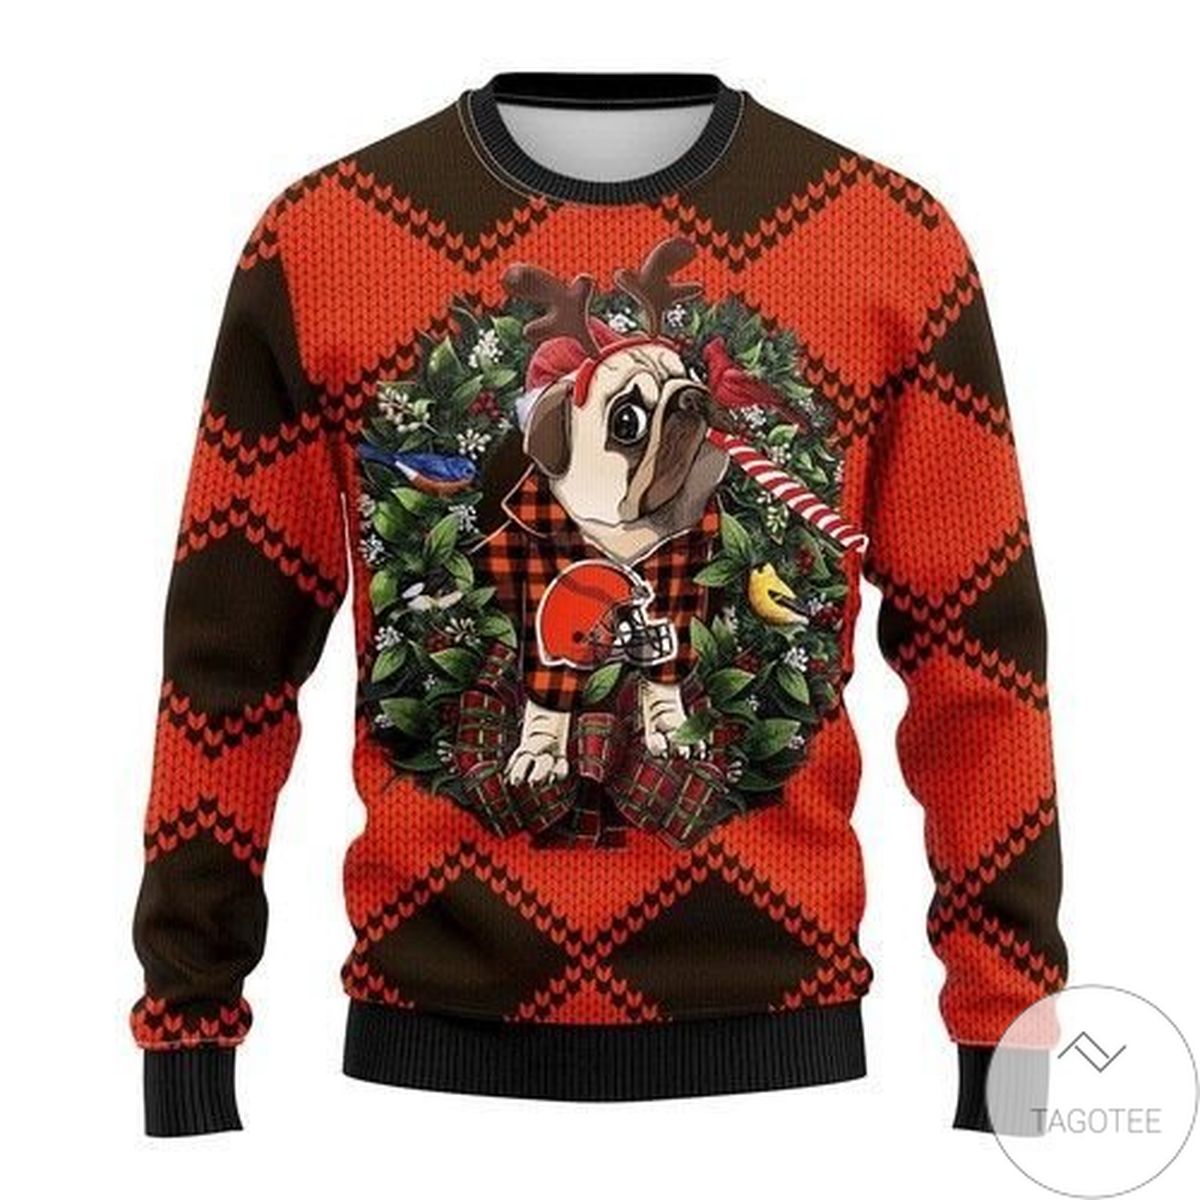 Cleveland Browns Pug Dog Ugly Christmas Sweater